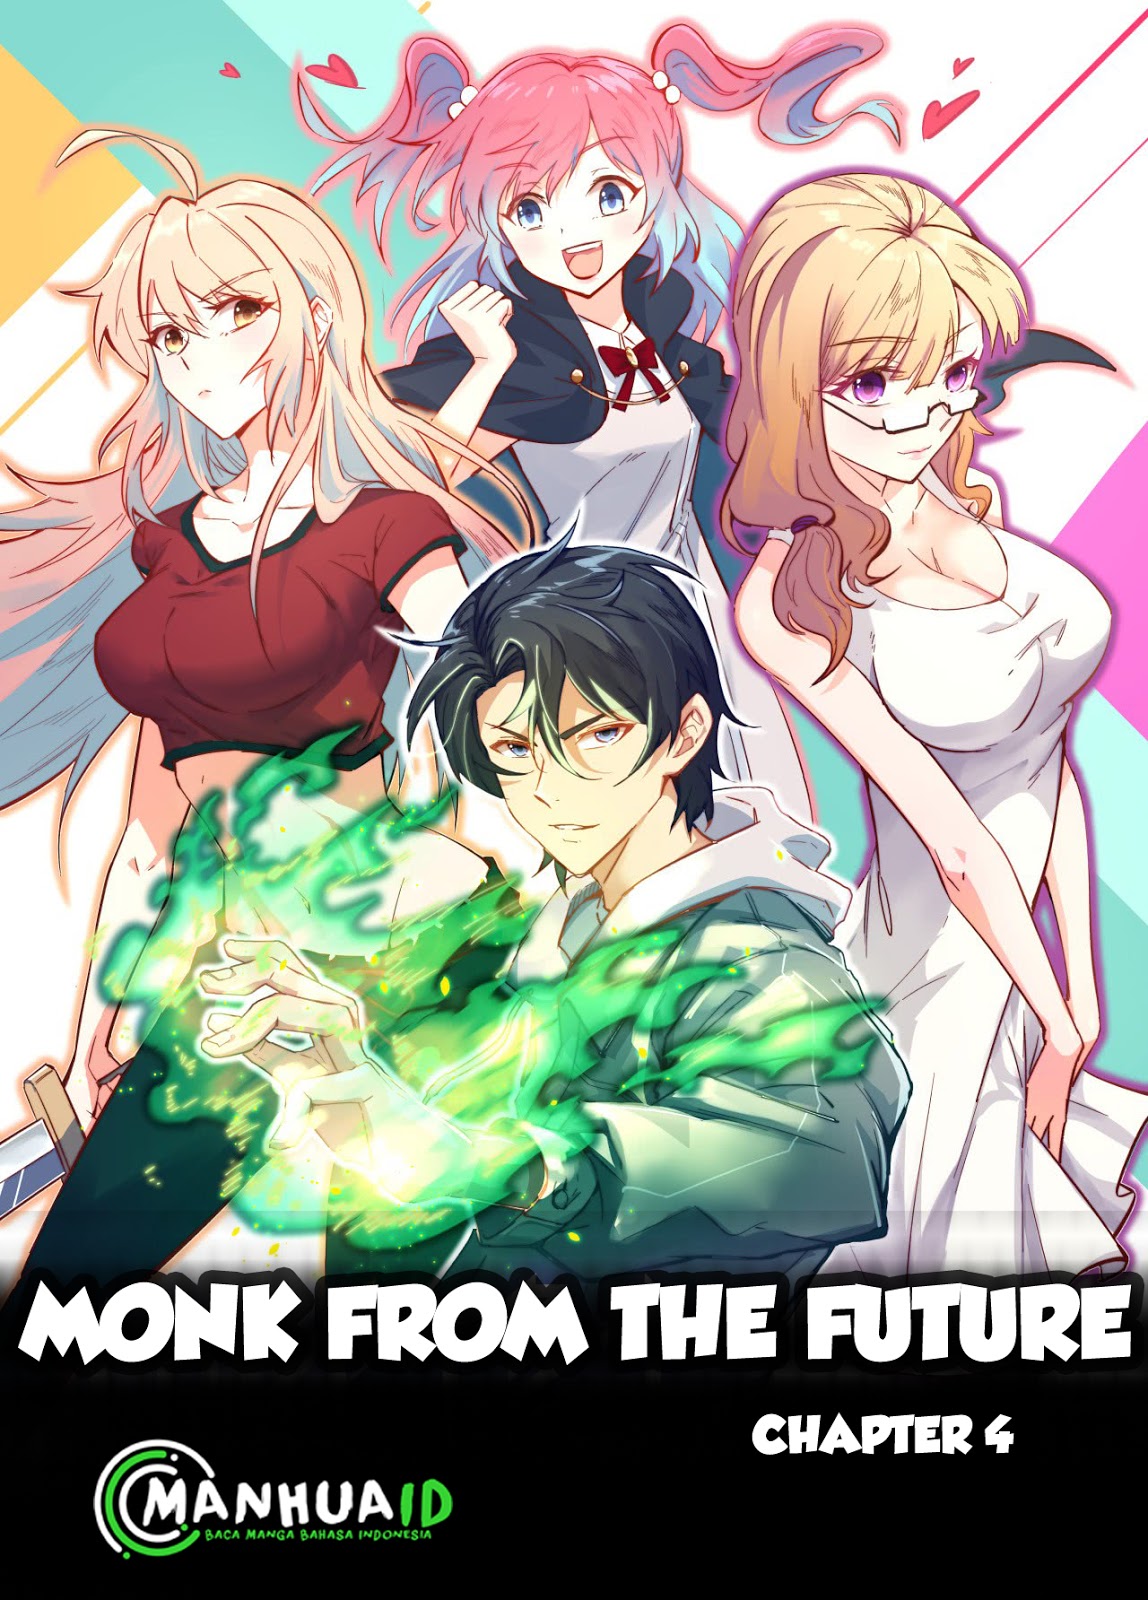 Monk From the Future Chapter 4